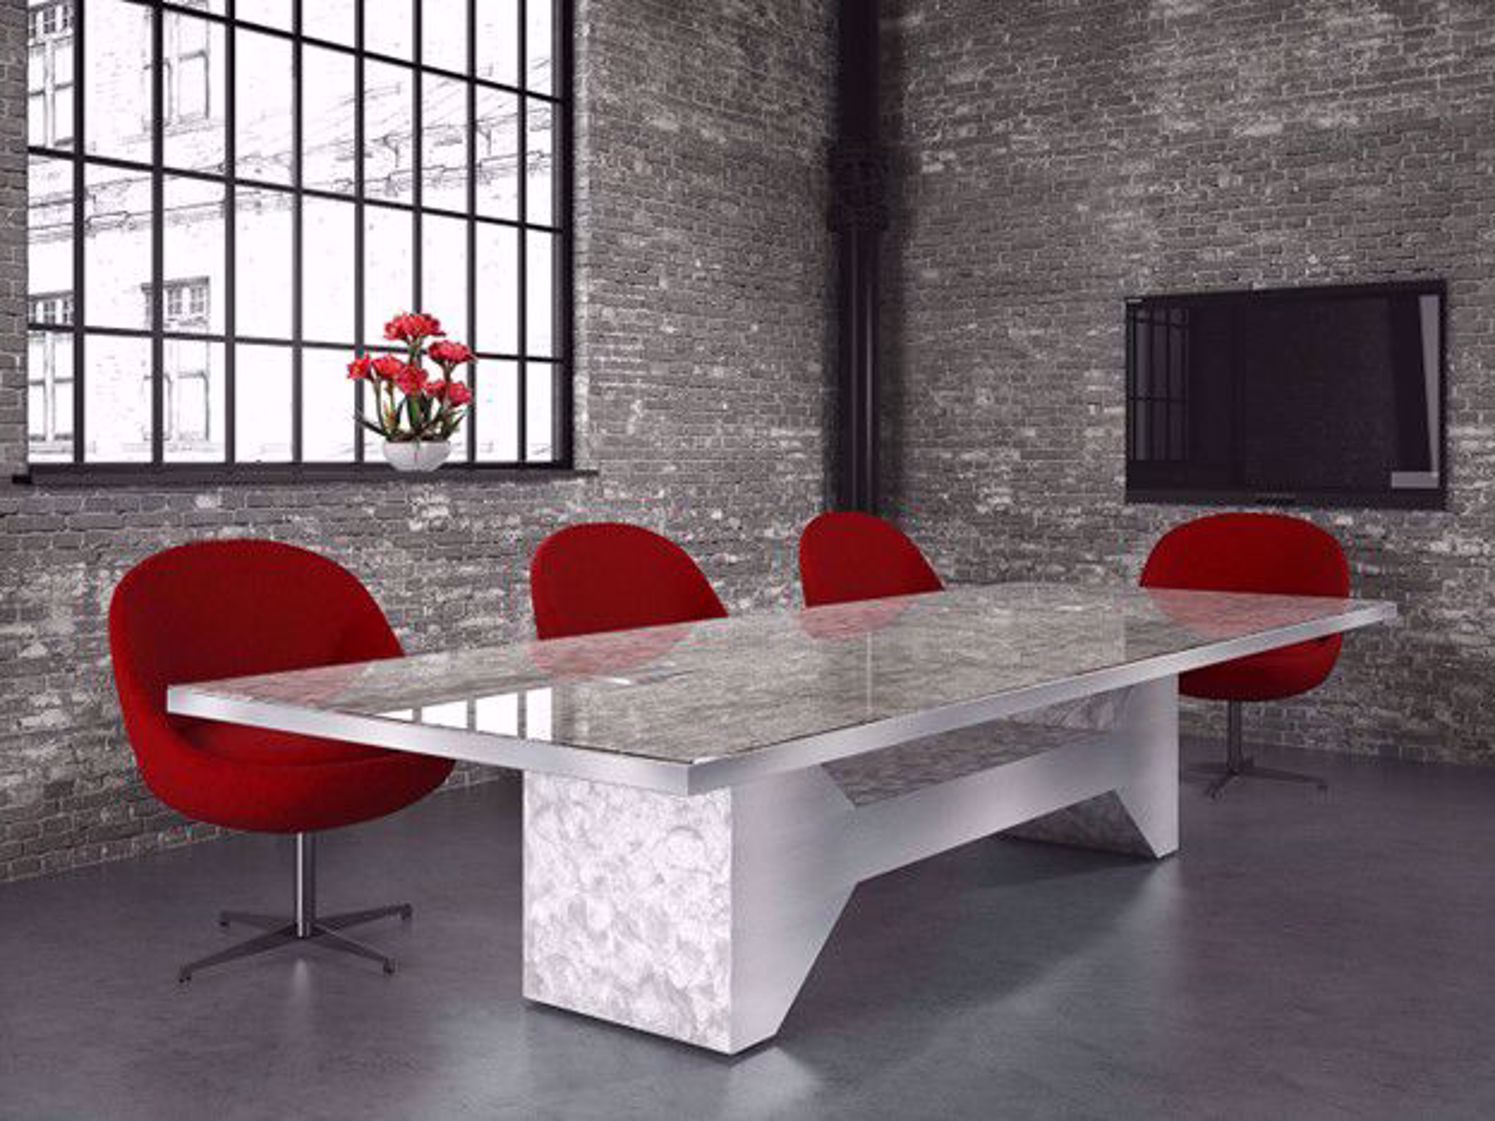 Exploring the Upscale Trend of Glass Conference Tables in the Modern Office